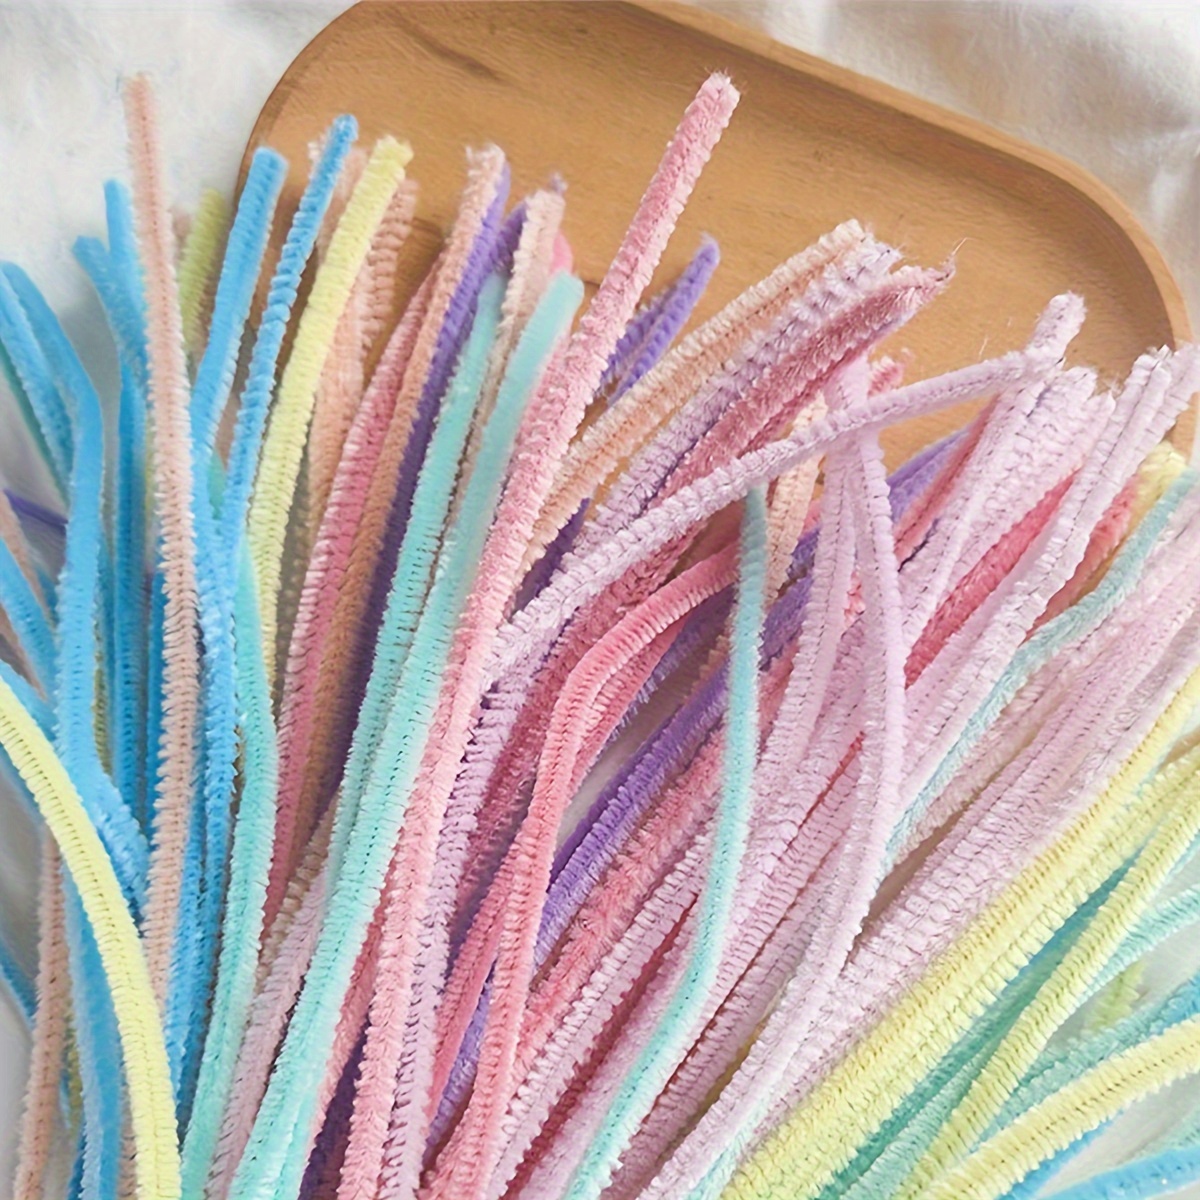 Pipe Cleaners, Multi Color Chenille Stems for DIY Art Creative Crafts Project Decorations, Colored Fuzzy Sticks, 1000 Pcs with 20 Assorted Colors 12